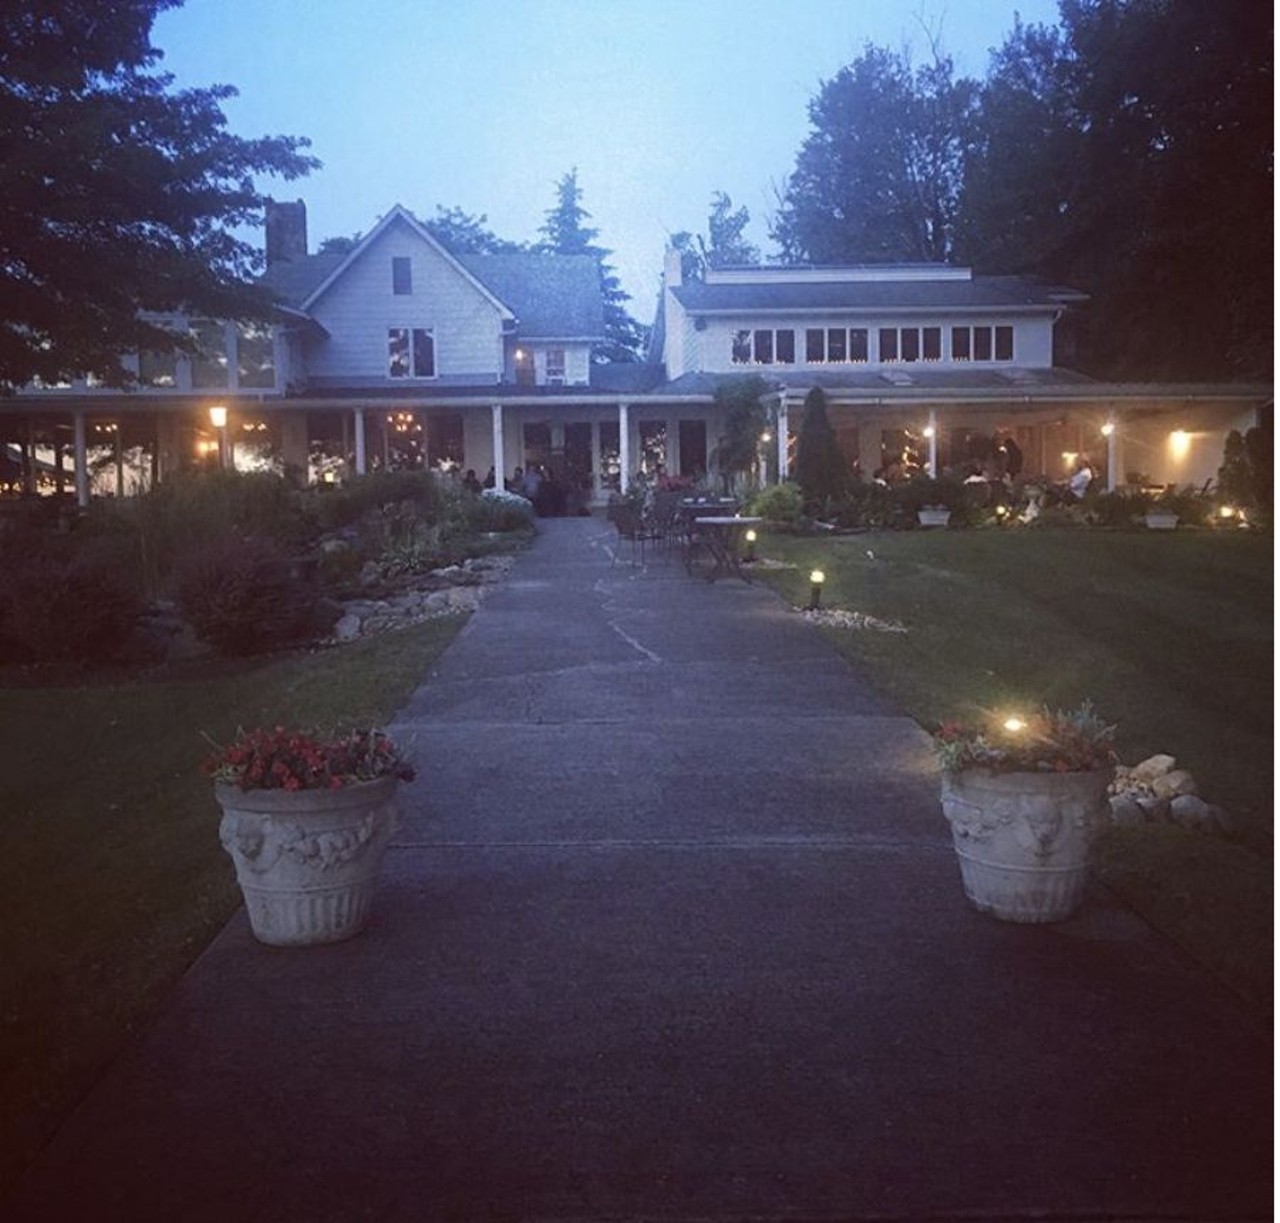 The Oaks Lakeside
5878 Longacre Ln, Chippewa Lake
The exterior of The Oaks Lakeside looks like the setting of a Nancy Meyers movie, and is a popular venue for weddings. Expect cozy views of Chippewa Lake from wherever you&#146;re seated.
Photo via honeysticksvintage/Instagram